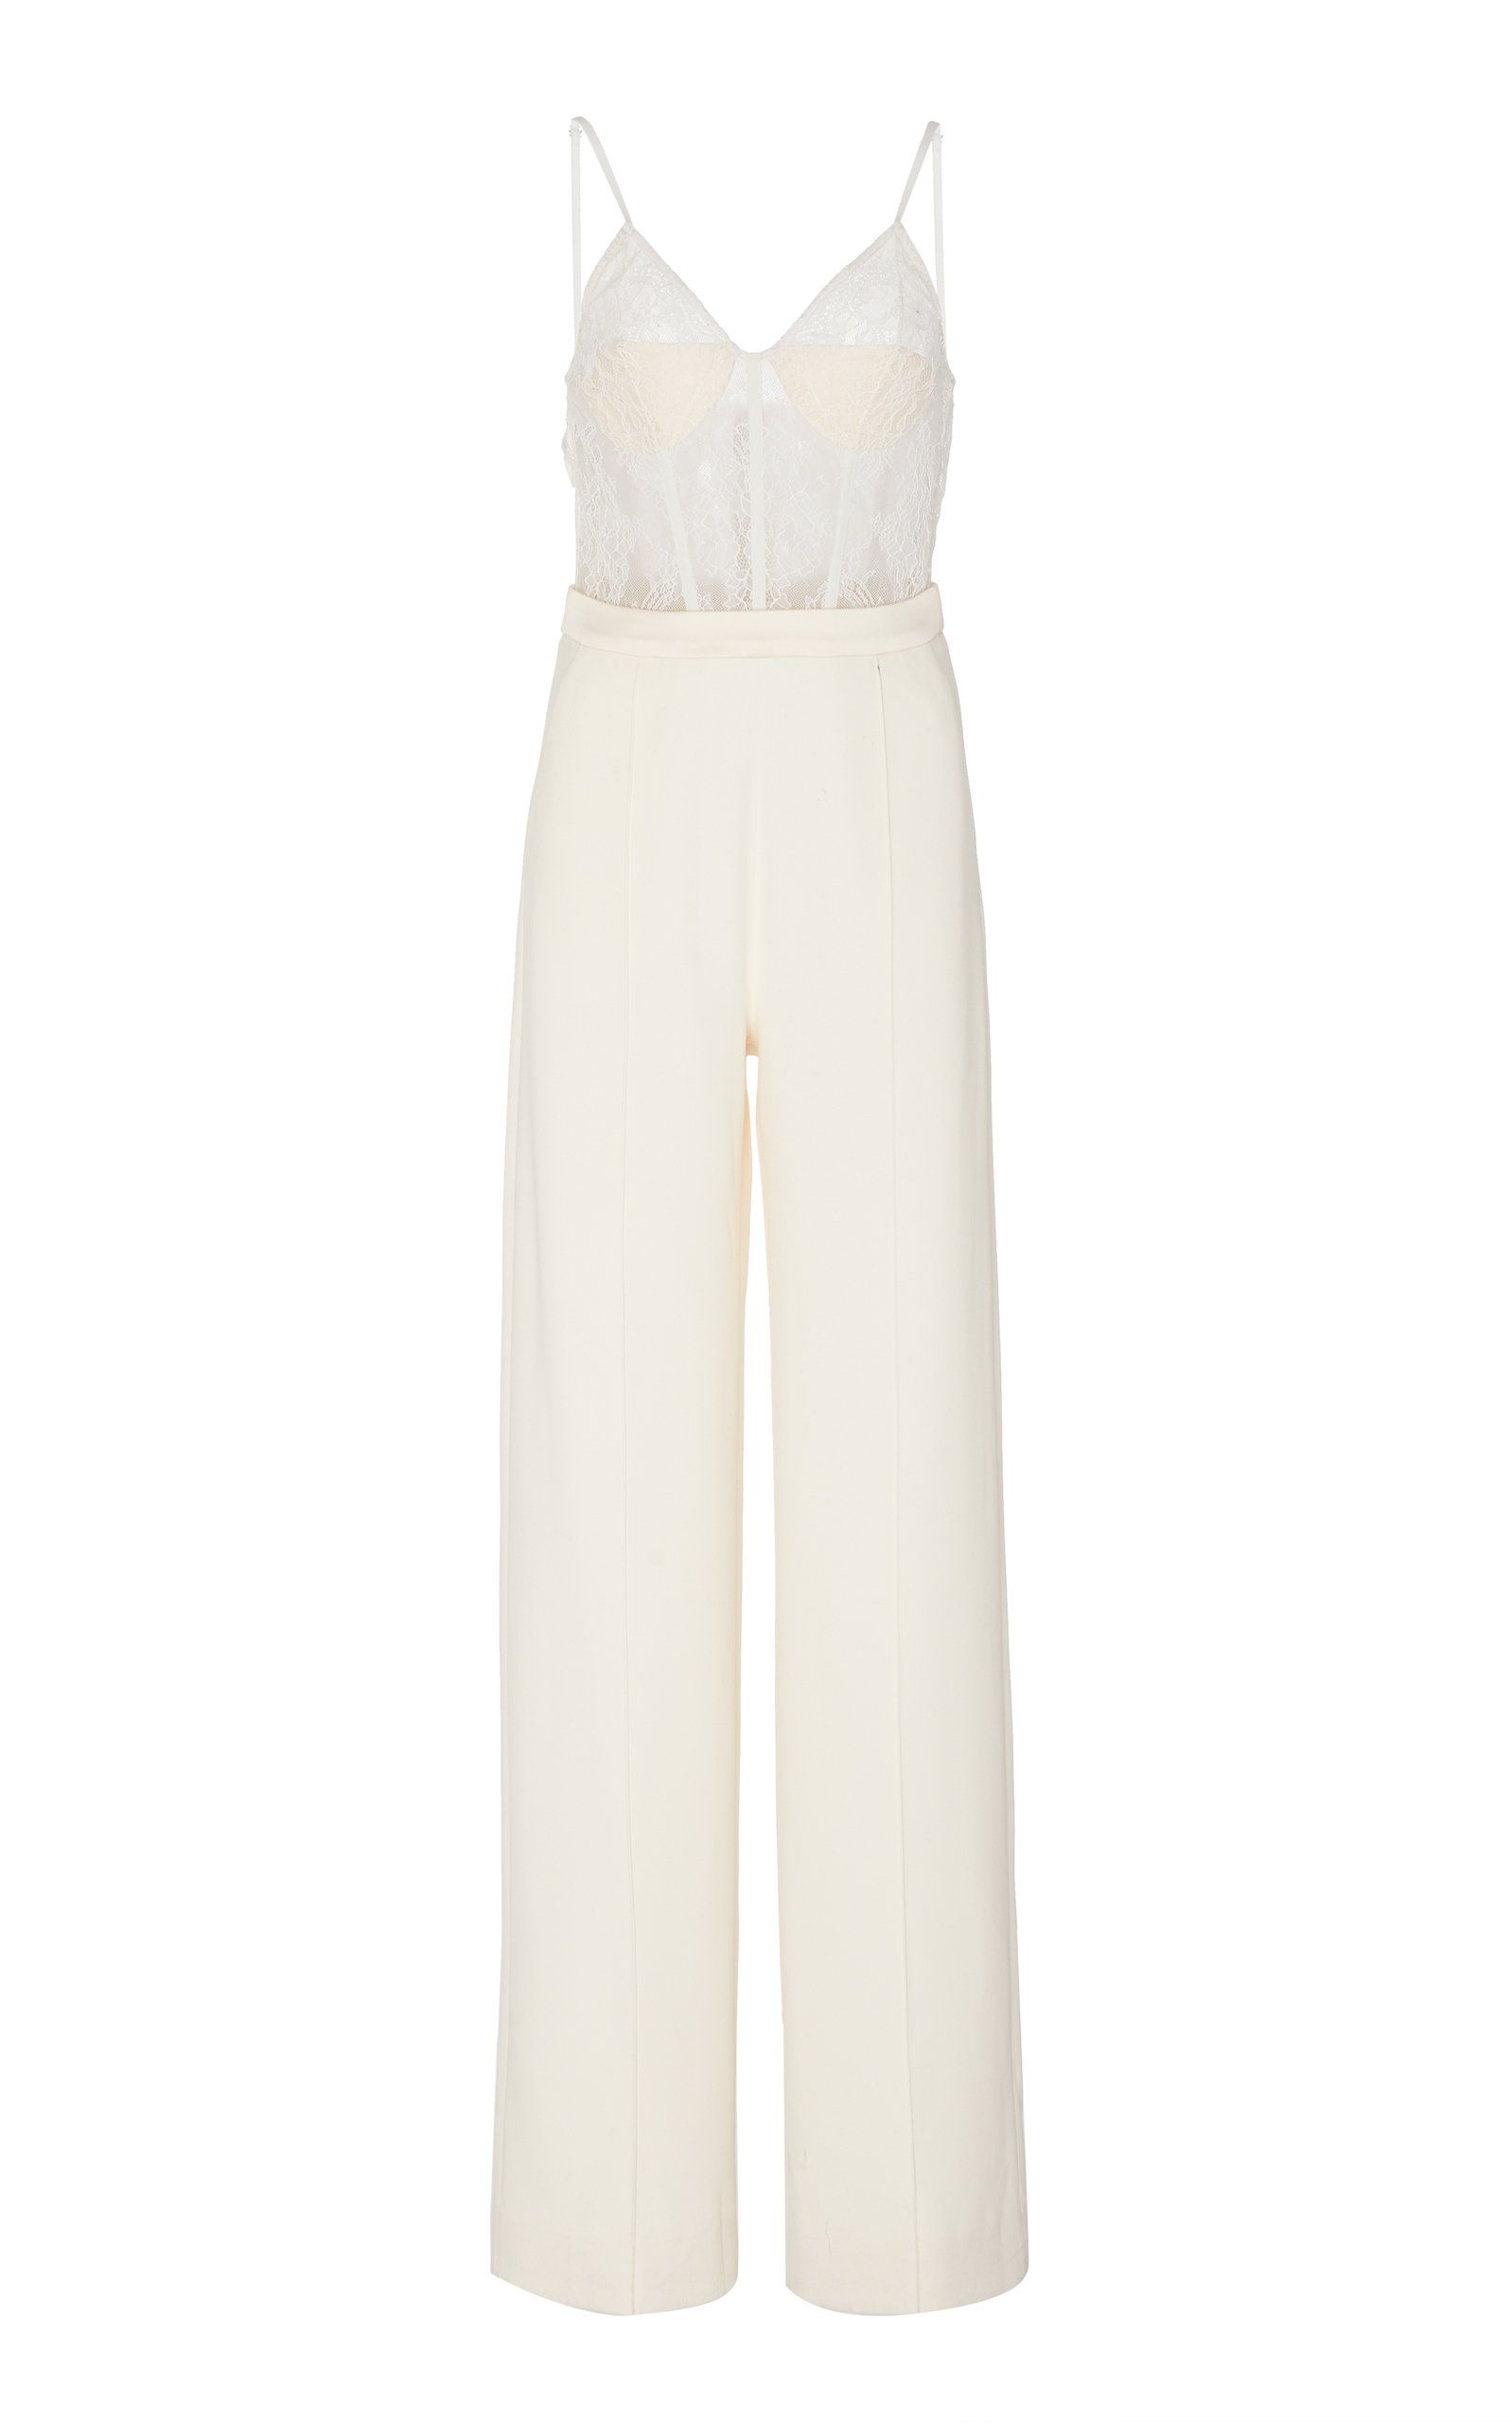 classy white jumpsuits for weddings